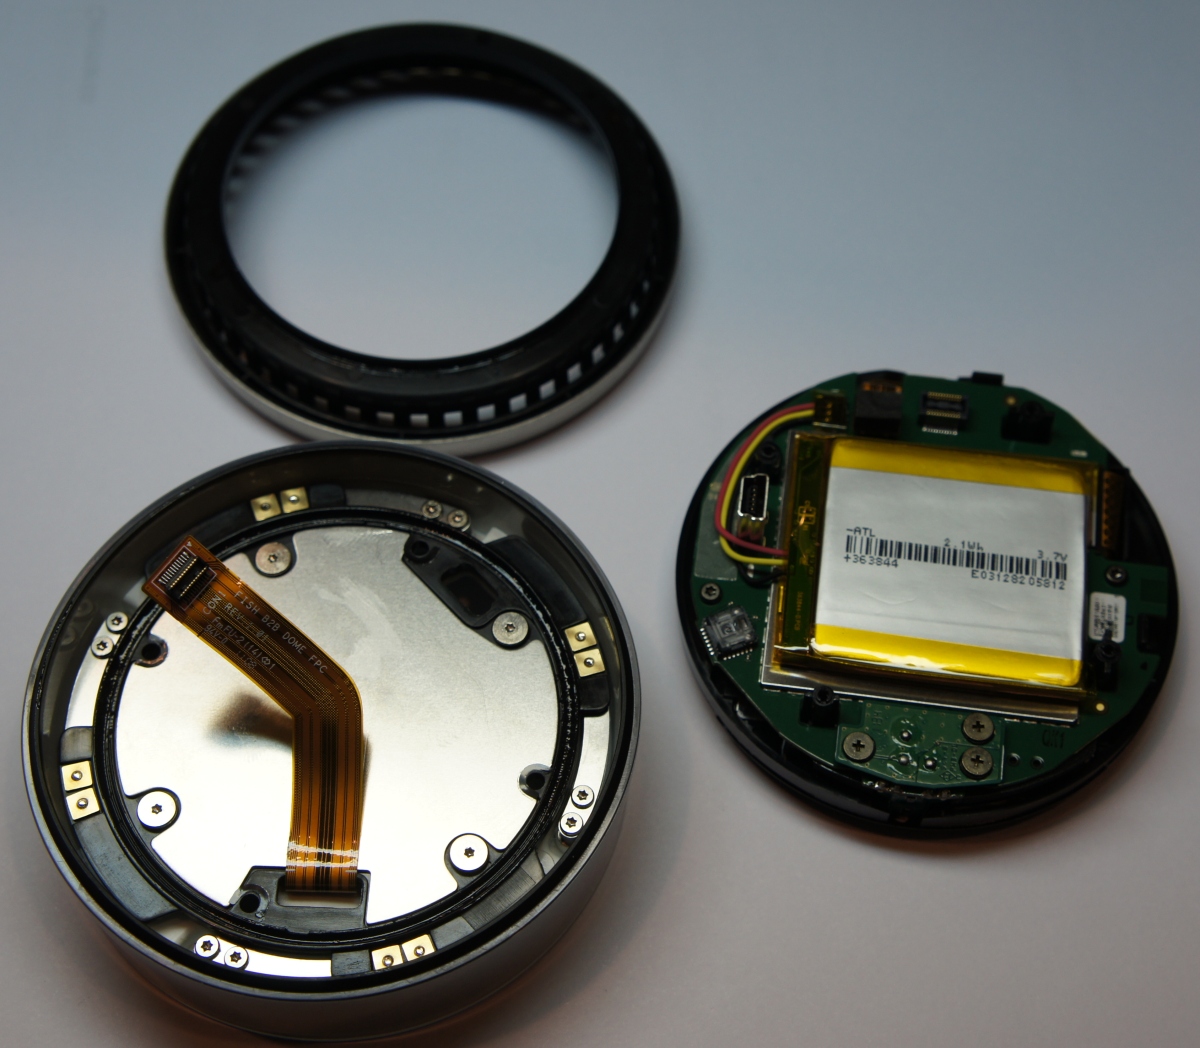 A close-up of a Nest Thermostat with the battery compartment open, showing the battery inside.